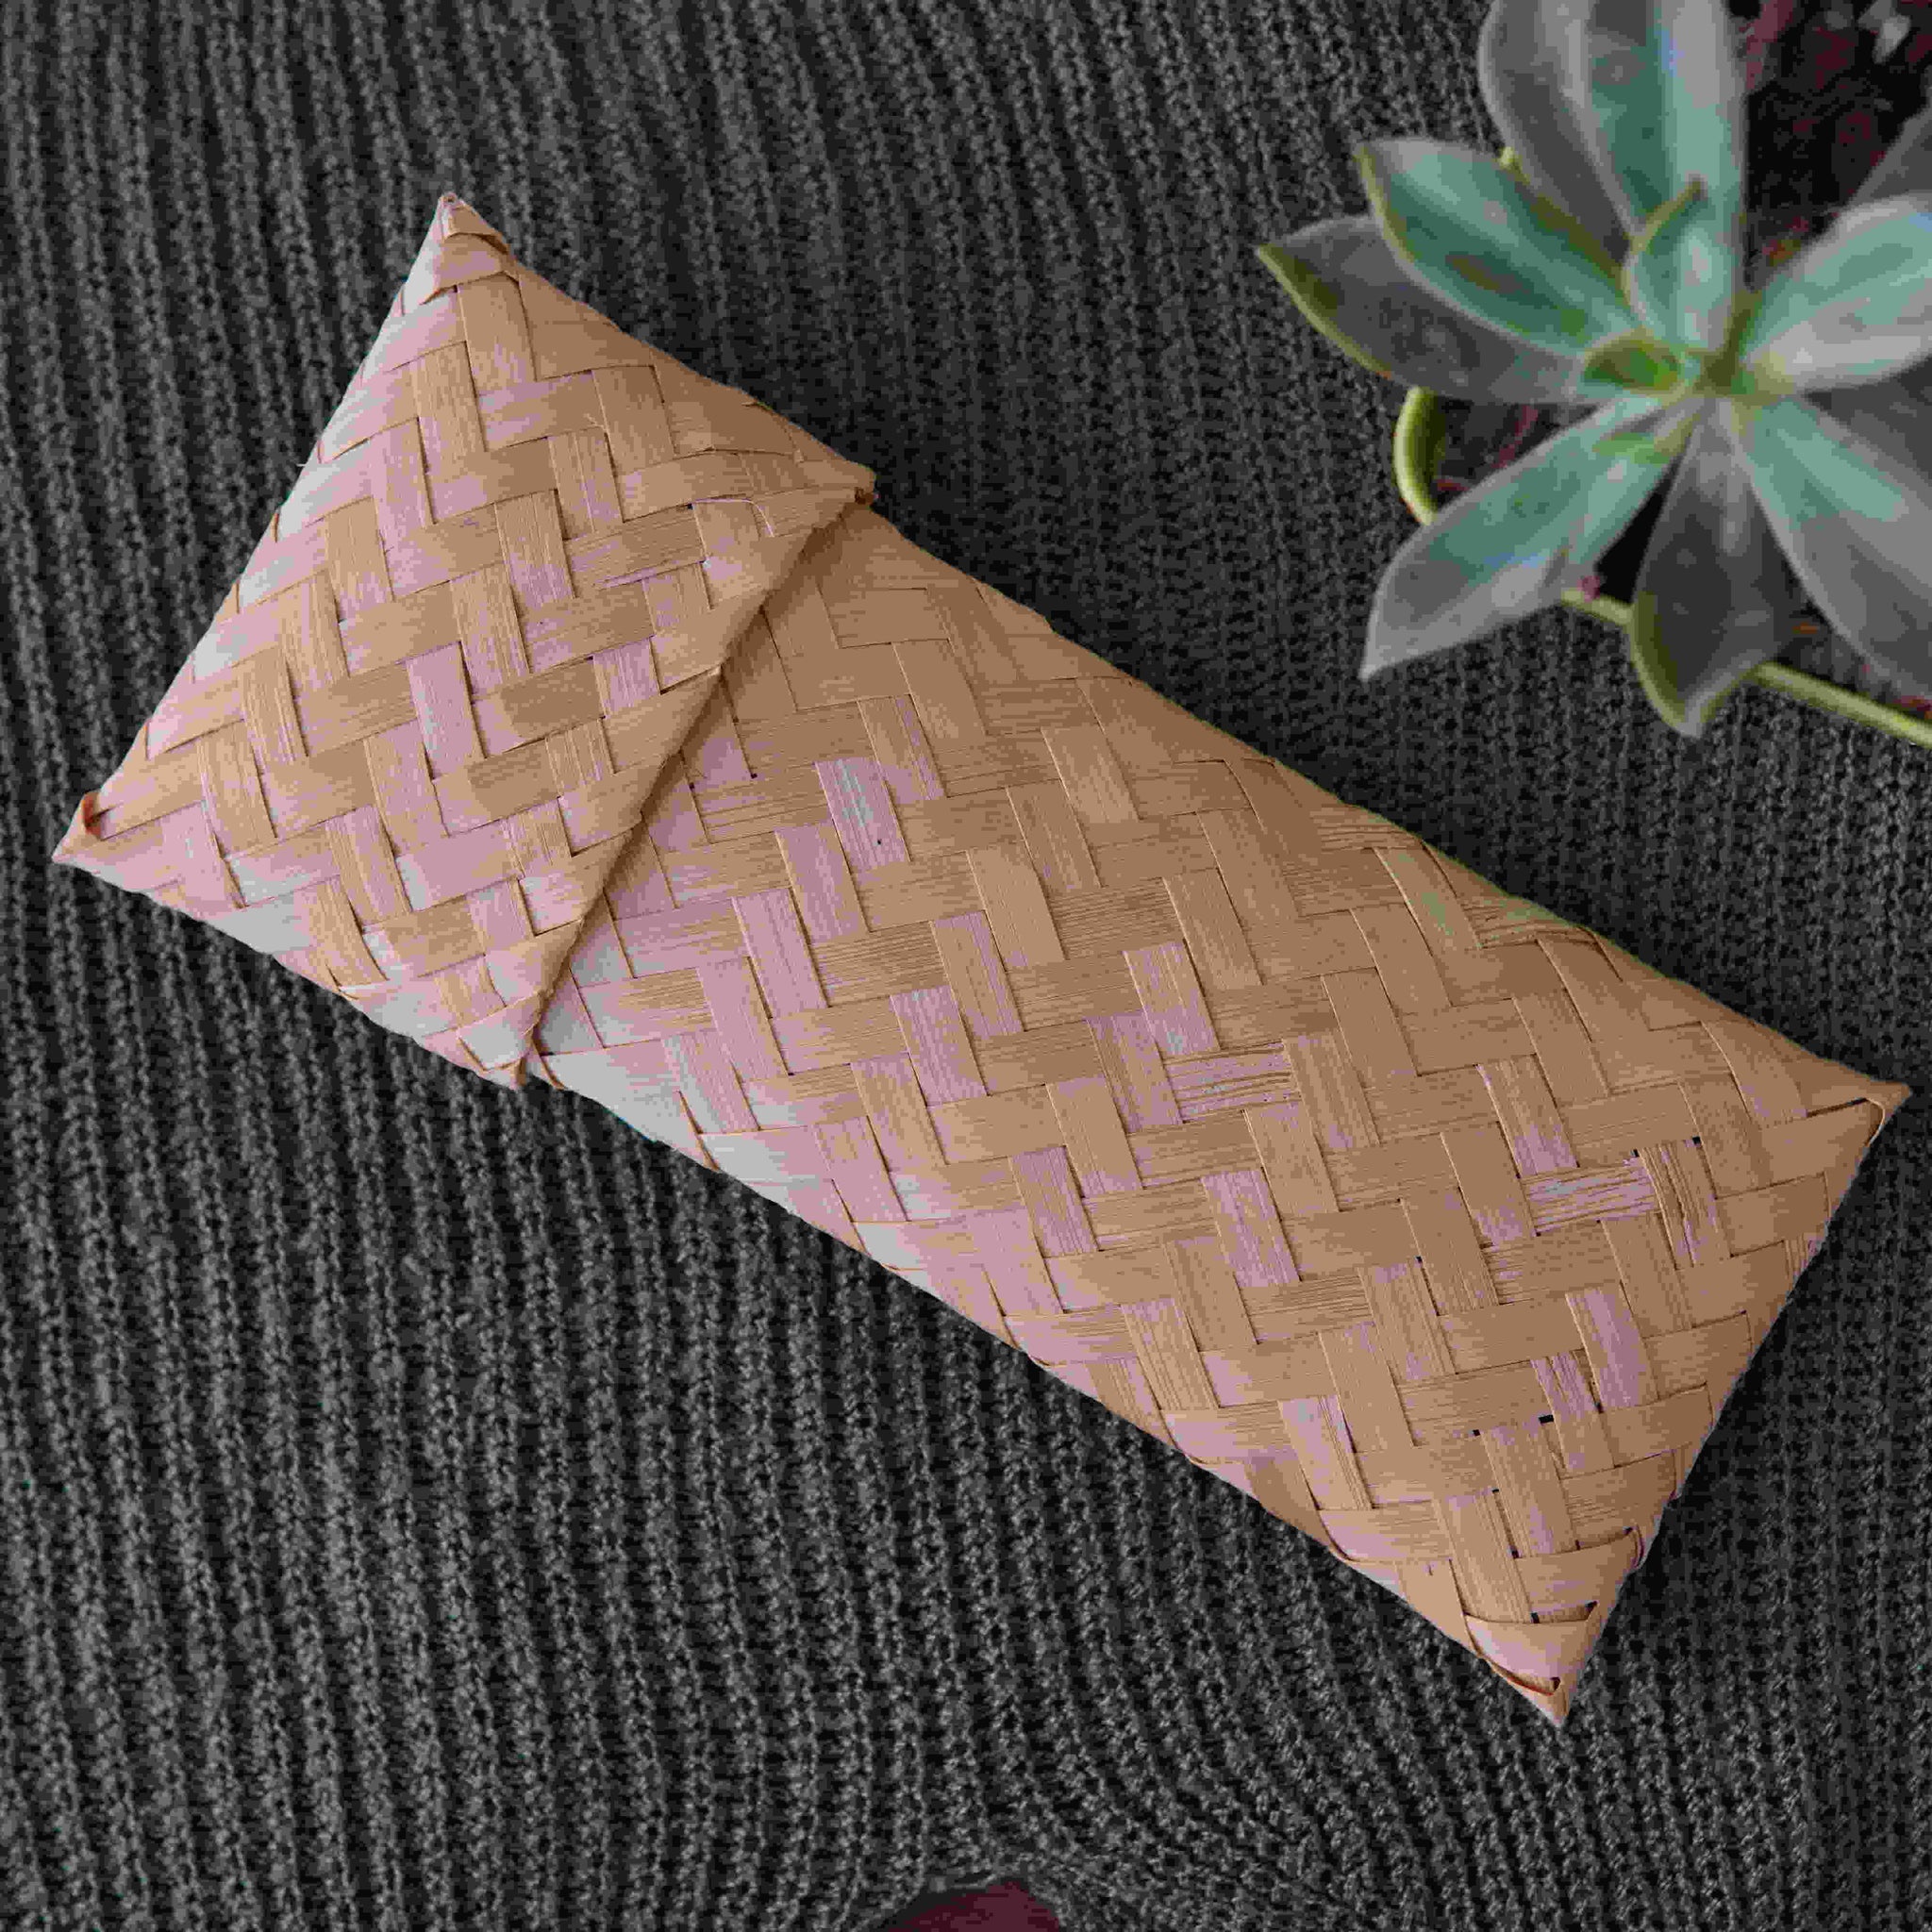 Bamboo pouch (3” x7”)